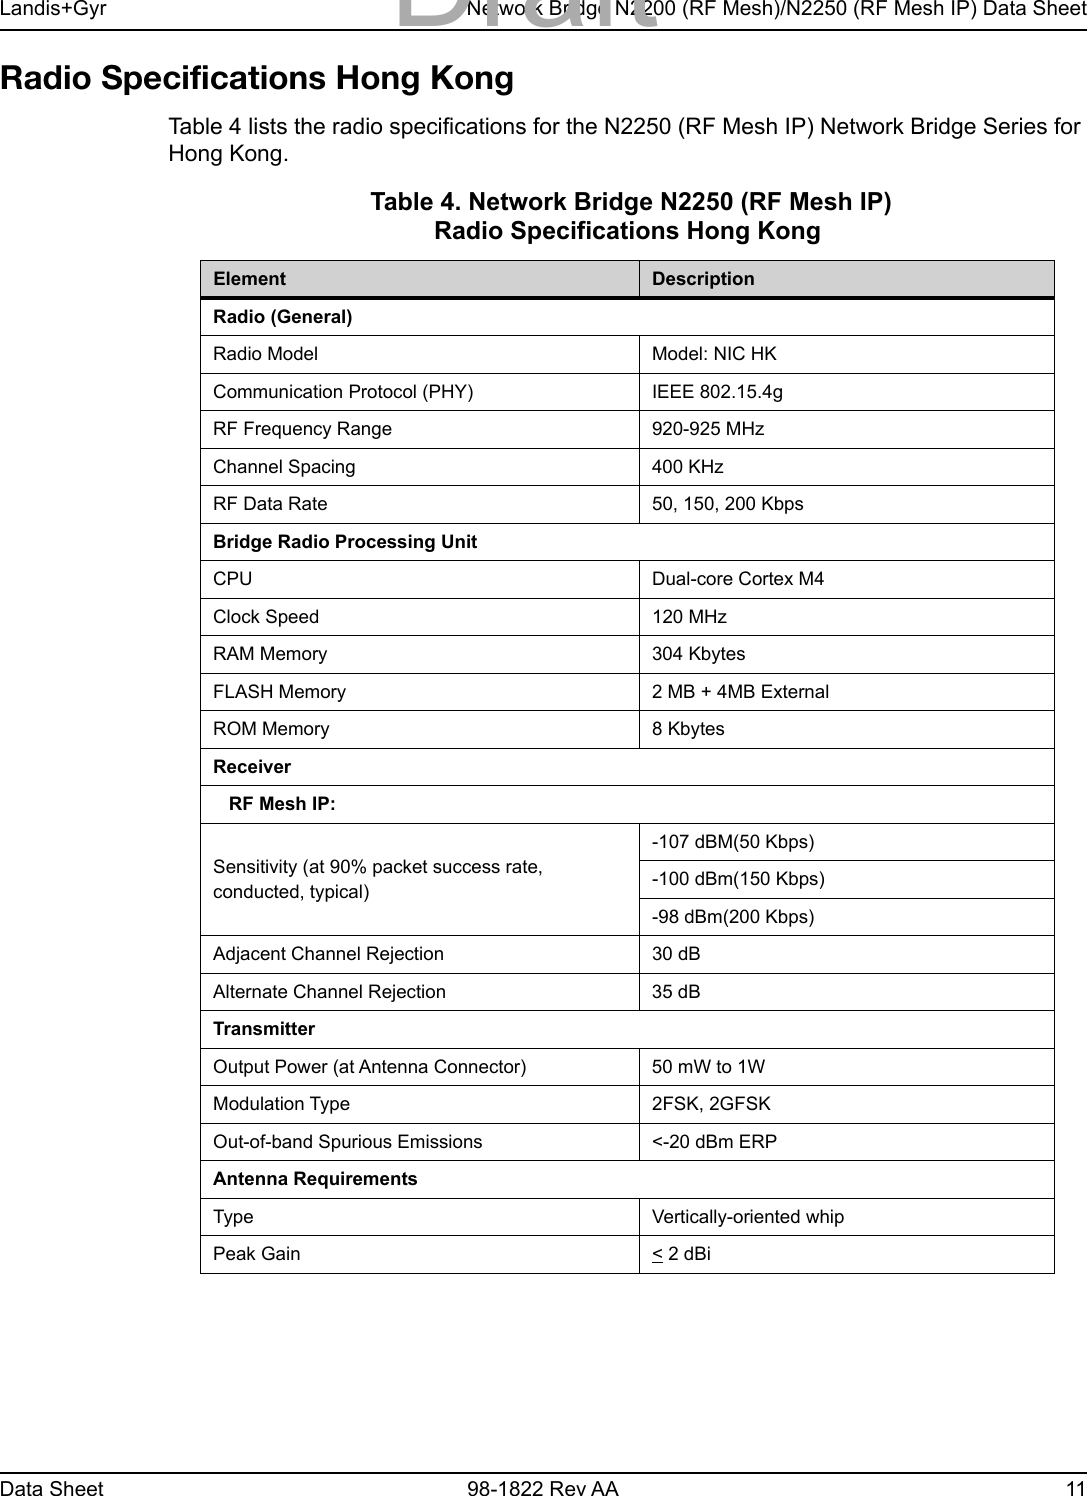 Landis+Gyr Network Bridge N2200 (RF Mesh)/N2250 (RF Mesh IP) Data SheetData Sheet 98-1822 Rev AA 11Radio Specifications Hong KongTable 4 lists the radio specifications for the N2250 (RF Mesh IP) Network Bridge Series for Hong Kong. Table 4. Network Bridge N2250 (RF Mesh IP) Radio Specifications Hong KongElement DescriptionRadio (General)Radio Model Model: NIC HKCommunication Protocol (PHY) IEEE 802.15.4gRF Frequency Range 920-925 MHzChannel Spacing 400 KHzRF Data Rate 50, 150, 200 KbpsBridge Radio Processing UnitCPU Dual-core Cortex M4Clock Speed 120 MHzRAM Memory 304 KbytesFLASH Memory 2 MB + 4MB ExternalROM Memory 8 KbytesReceiver   RF Mesh IP:Sensitivity (at 90% packet success rate, conducted, typical) -107 dBM(50 Kbps)-100 dBm(150 Kbps)-98 dBm(200 Kbps)Adjacent Channel Rejection 30 dBAlternate Channel Rejection 35 dBTransmitterOutput Power (at Antenna Connector) 50 mW to 1WModulation Type 2FSK, 2GFSKOut-of-band Spurious Emissions &lt;-20 dBm ERP Antenna RequirementsType Vertically-oriented whipPeak Gain &lt; 2 dBiDraft